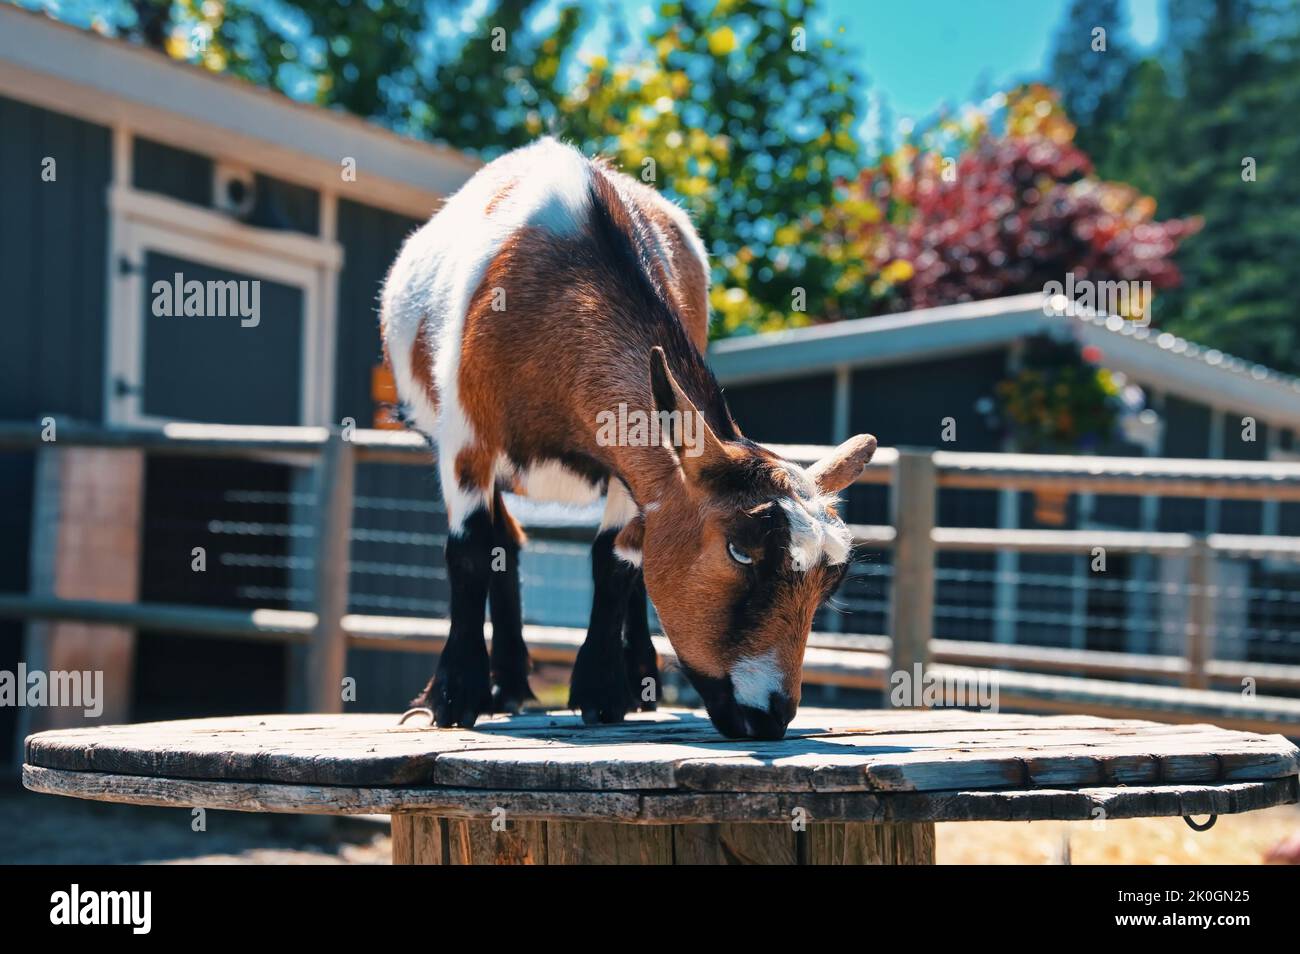 Goat in a Zoo standing on a barrel Stock Photo